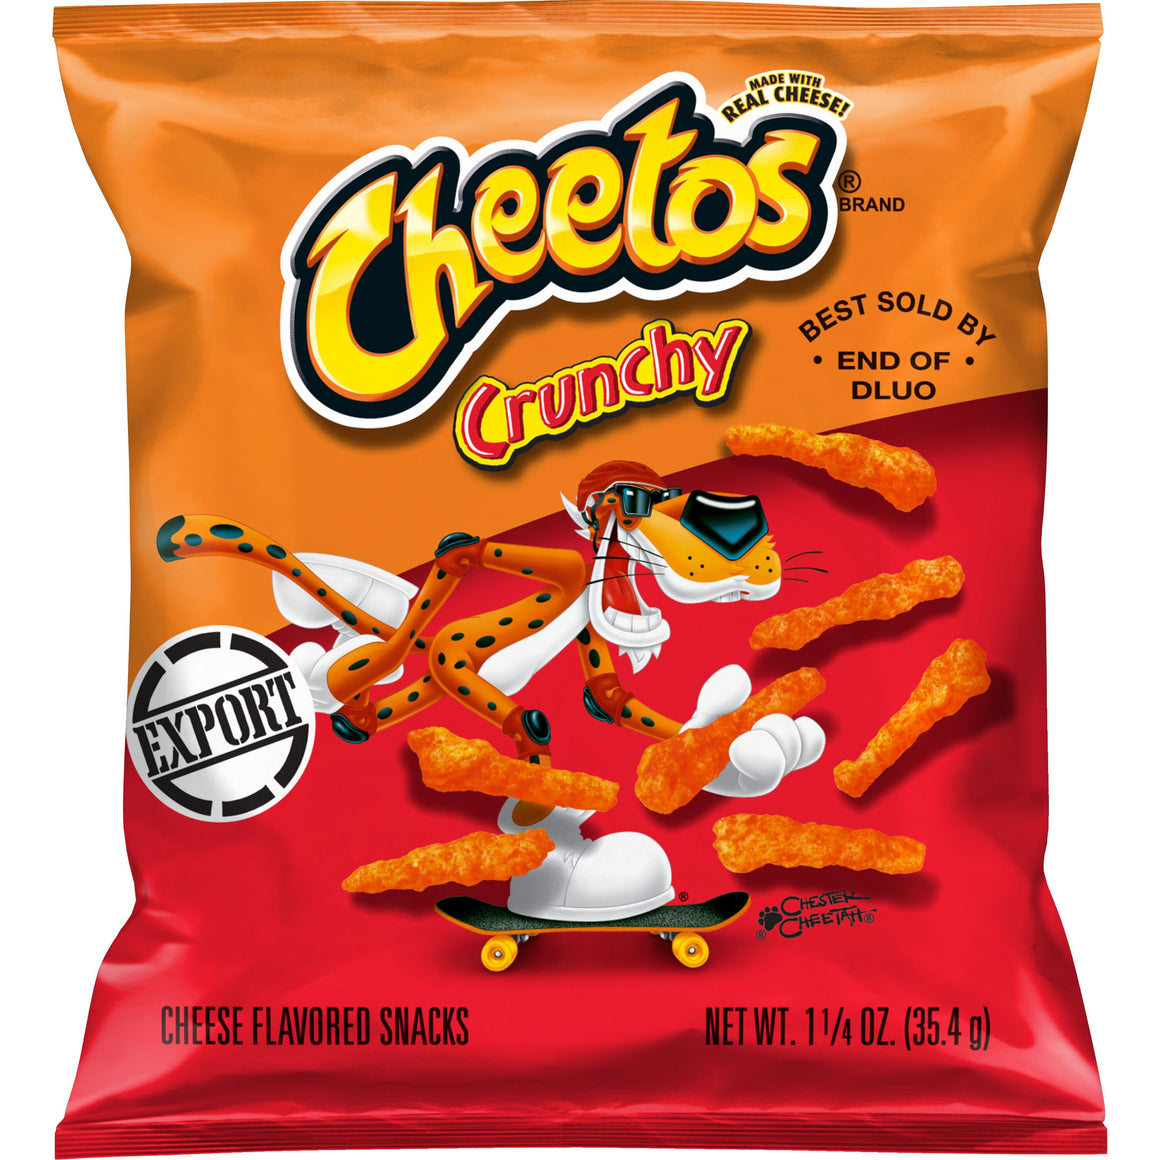 Cheetos Crunchy Cheese Flavored Snacks, Made with Real Cheese, 1.25 OZ (35g) - Export